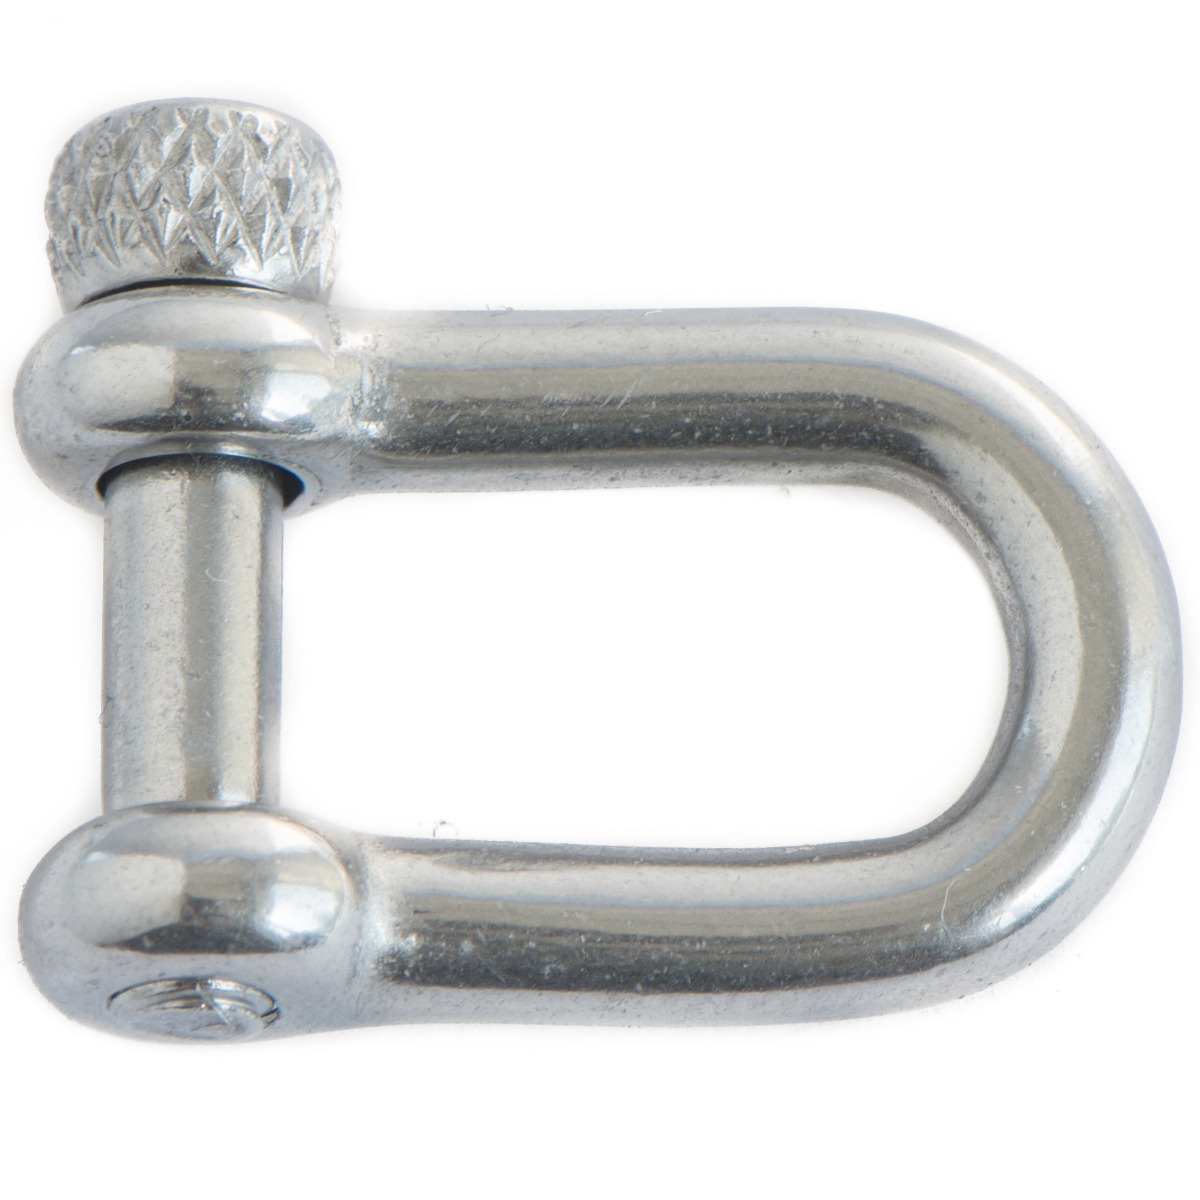 5mm Thickness Industrial Stainless Steel Dual Swivel Eye Shackle 